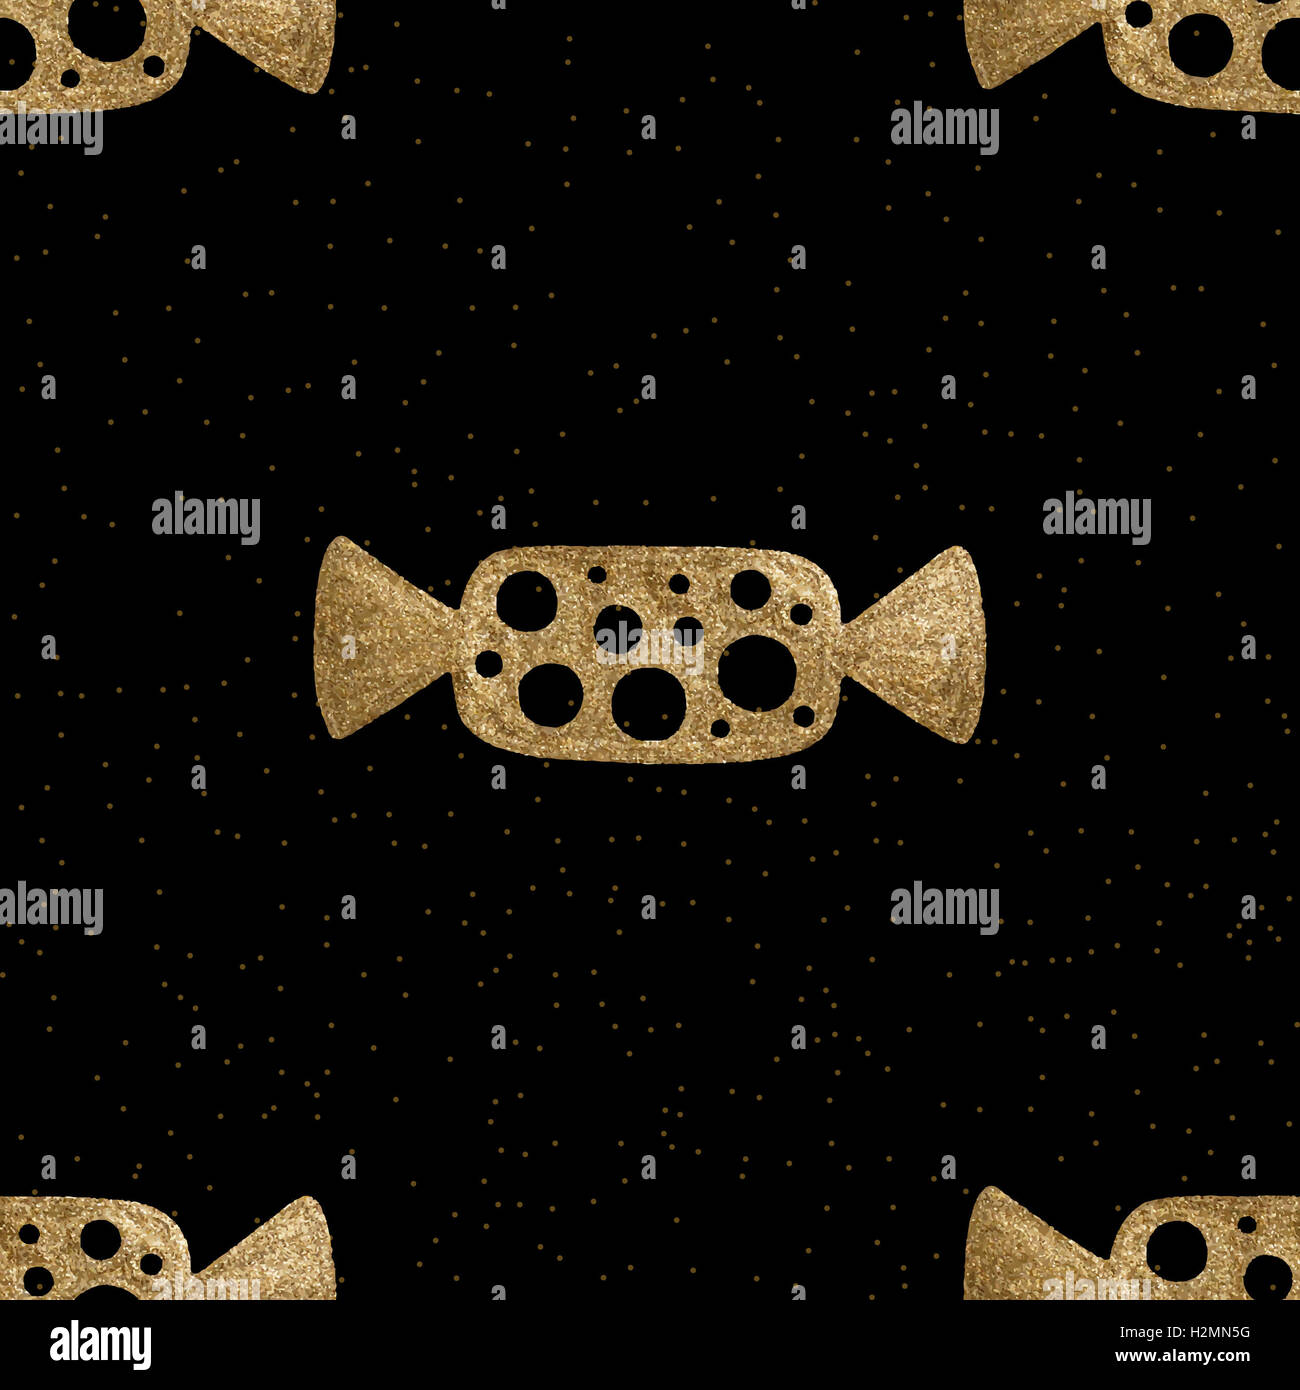 Gold hand painted seamless pattern. Abstract candy vector illustration. Stock Photo